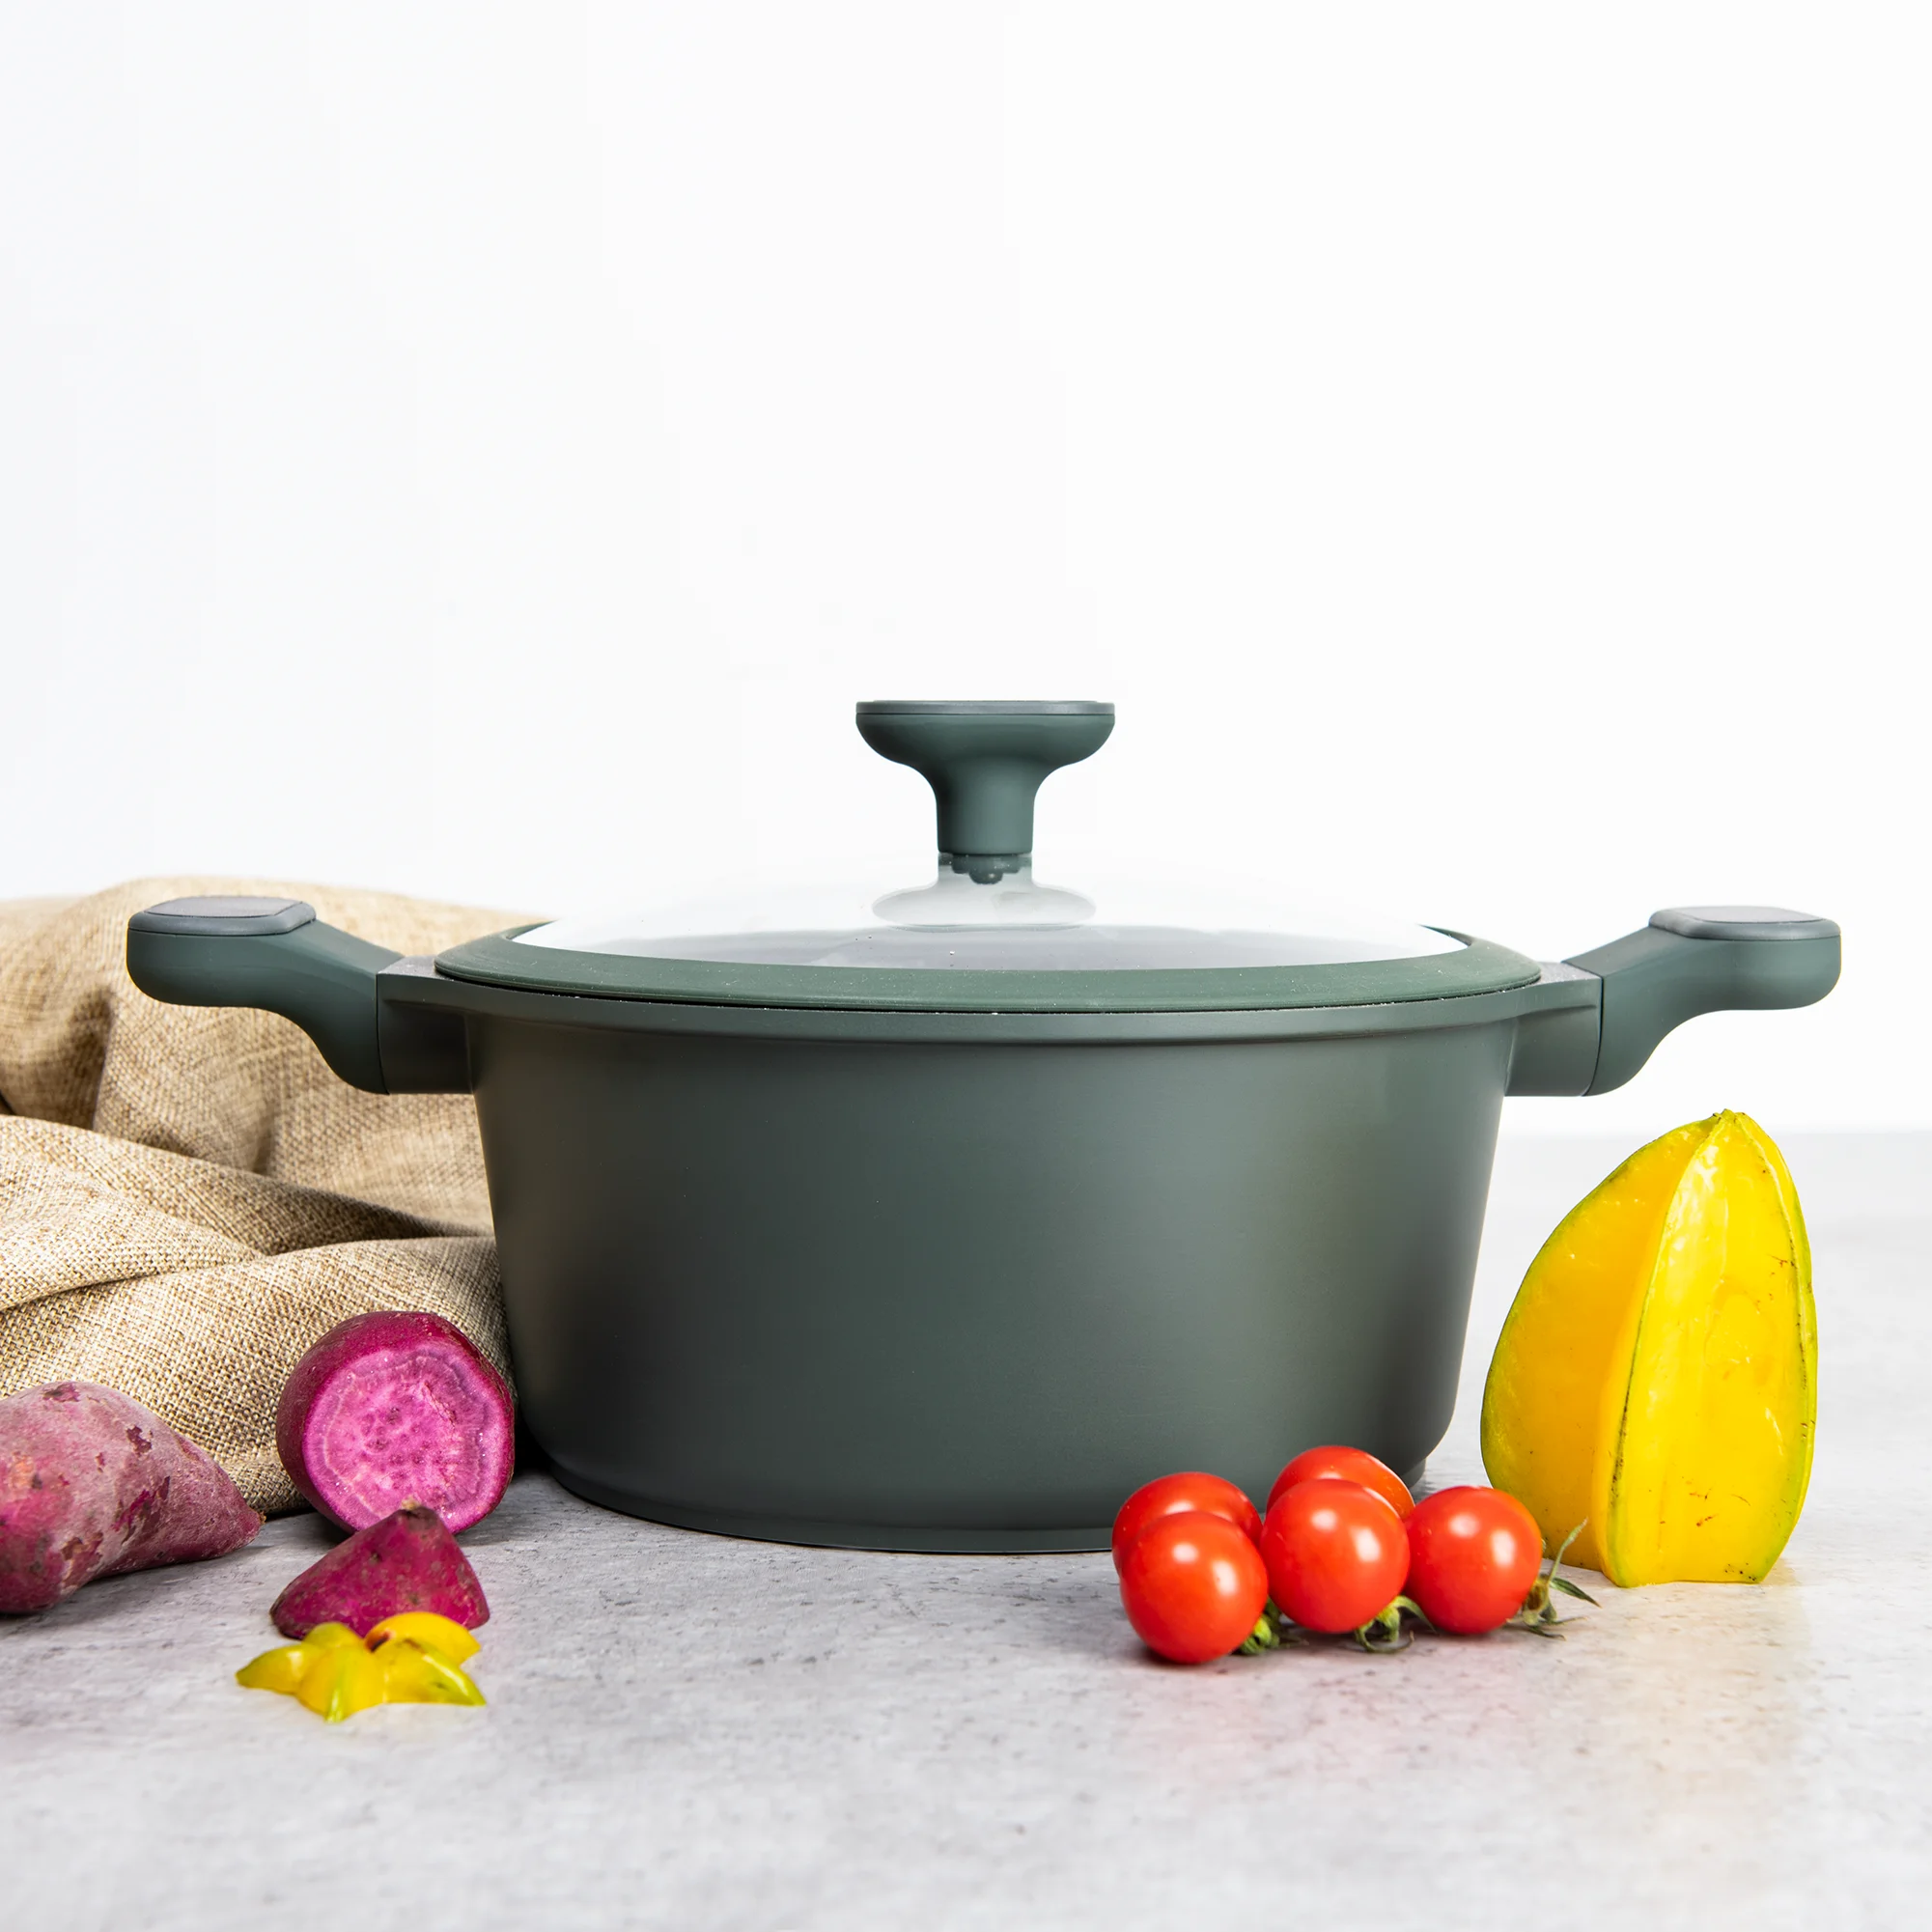 

BESCO Sample Escalation Series 28cm Non Stick Marble Coated Cast Aluminum Casserole Casserole Dish with Tempered Glass Lid Green